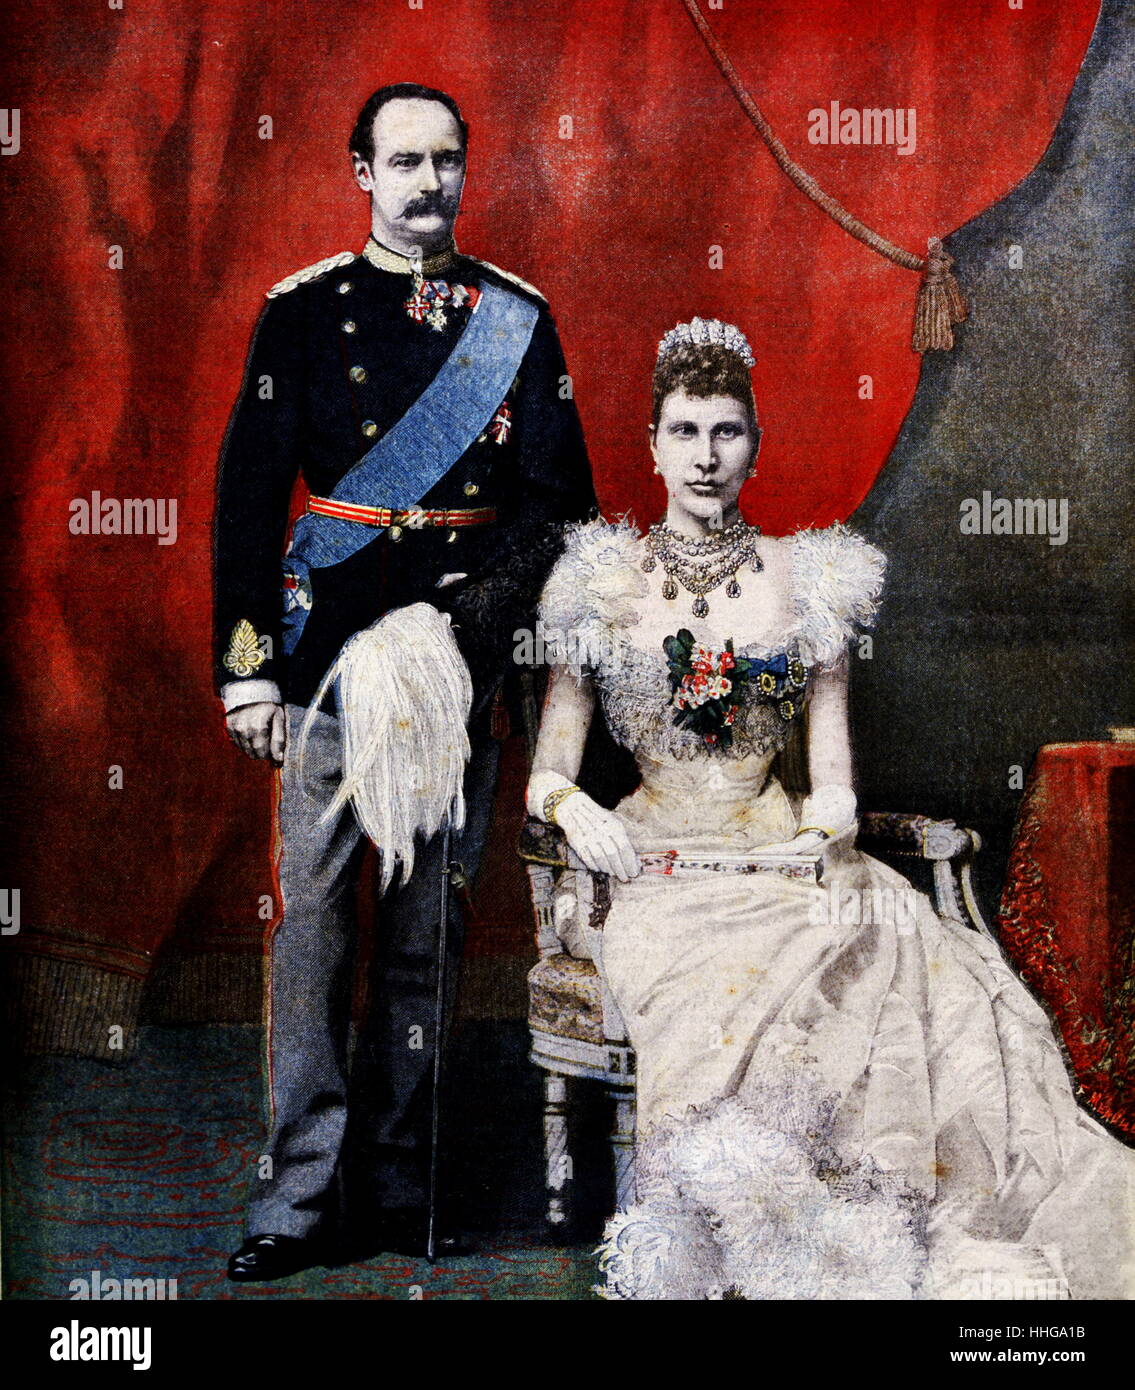 Crown Prince and princess of Denmark in 1896. Frederik VIII (1843 – 1912) was King of Denmark from 1906 to 1912. Before his accession, he served as crown prince for 43 years. Louise Josephine Eugenie of Sweden (1851 – 1926), was Queen of Denmark as the spouse of King Frederick VIII. Stock Photo